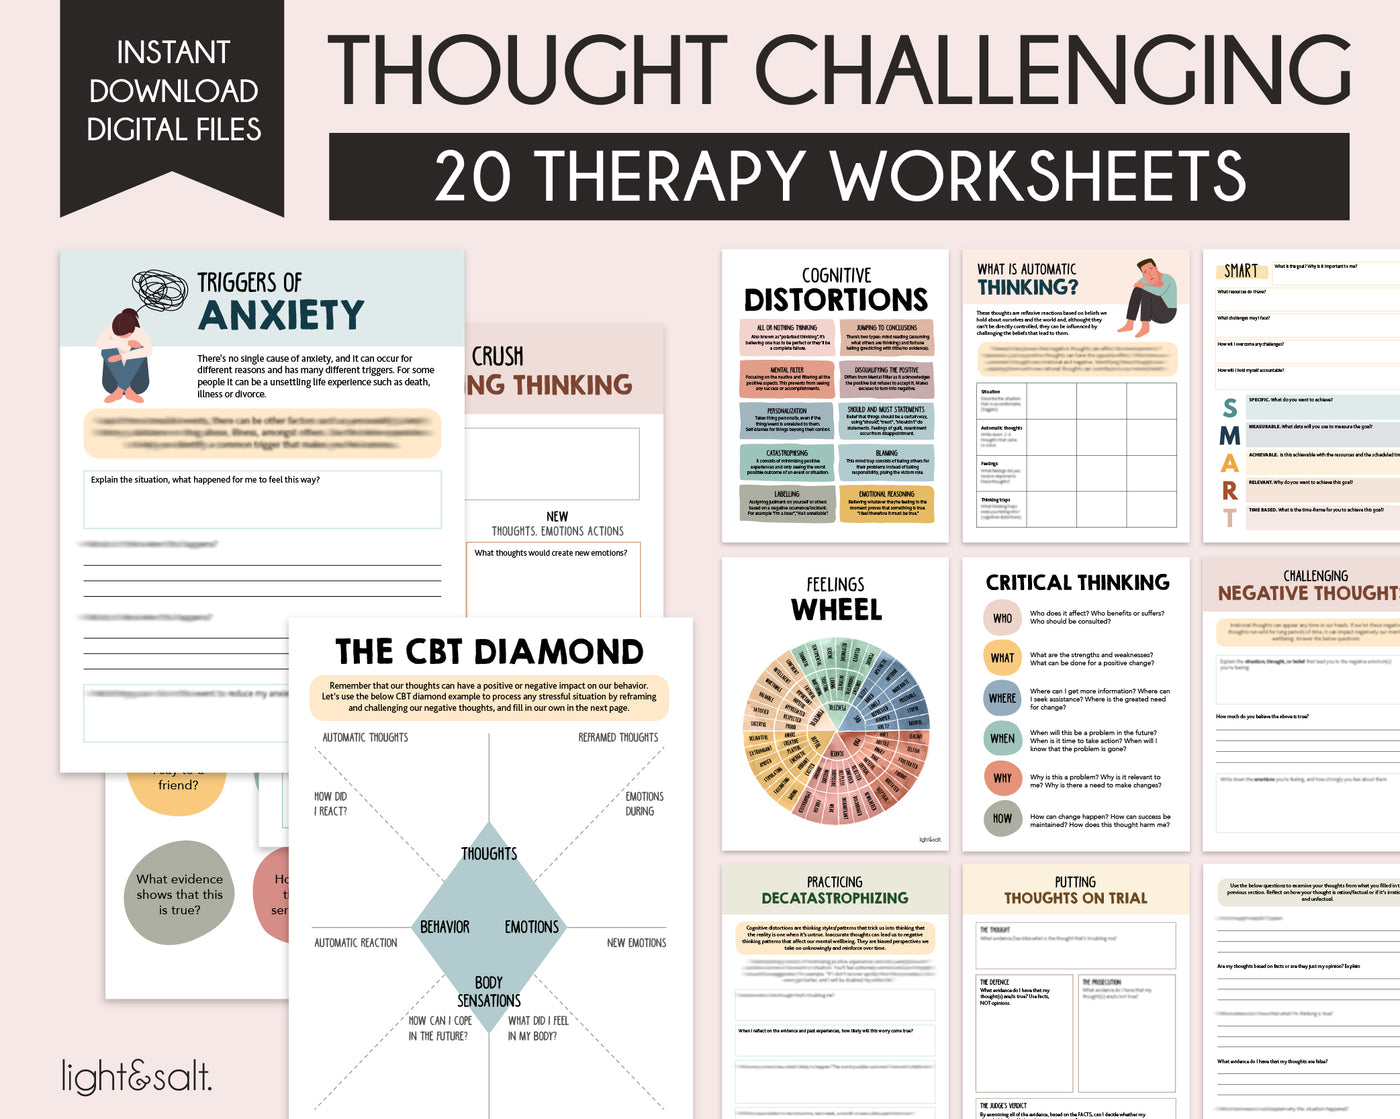 Thought Challenging worksheets